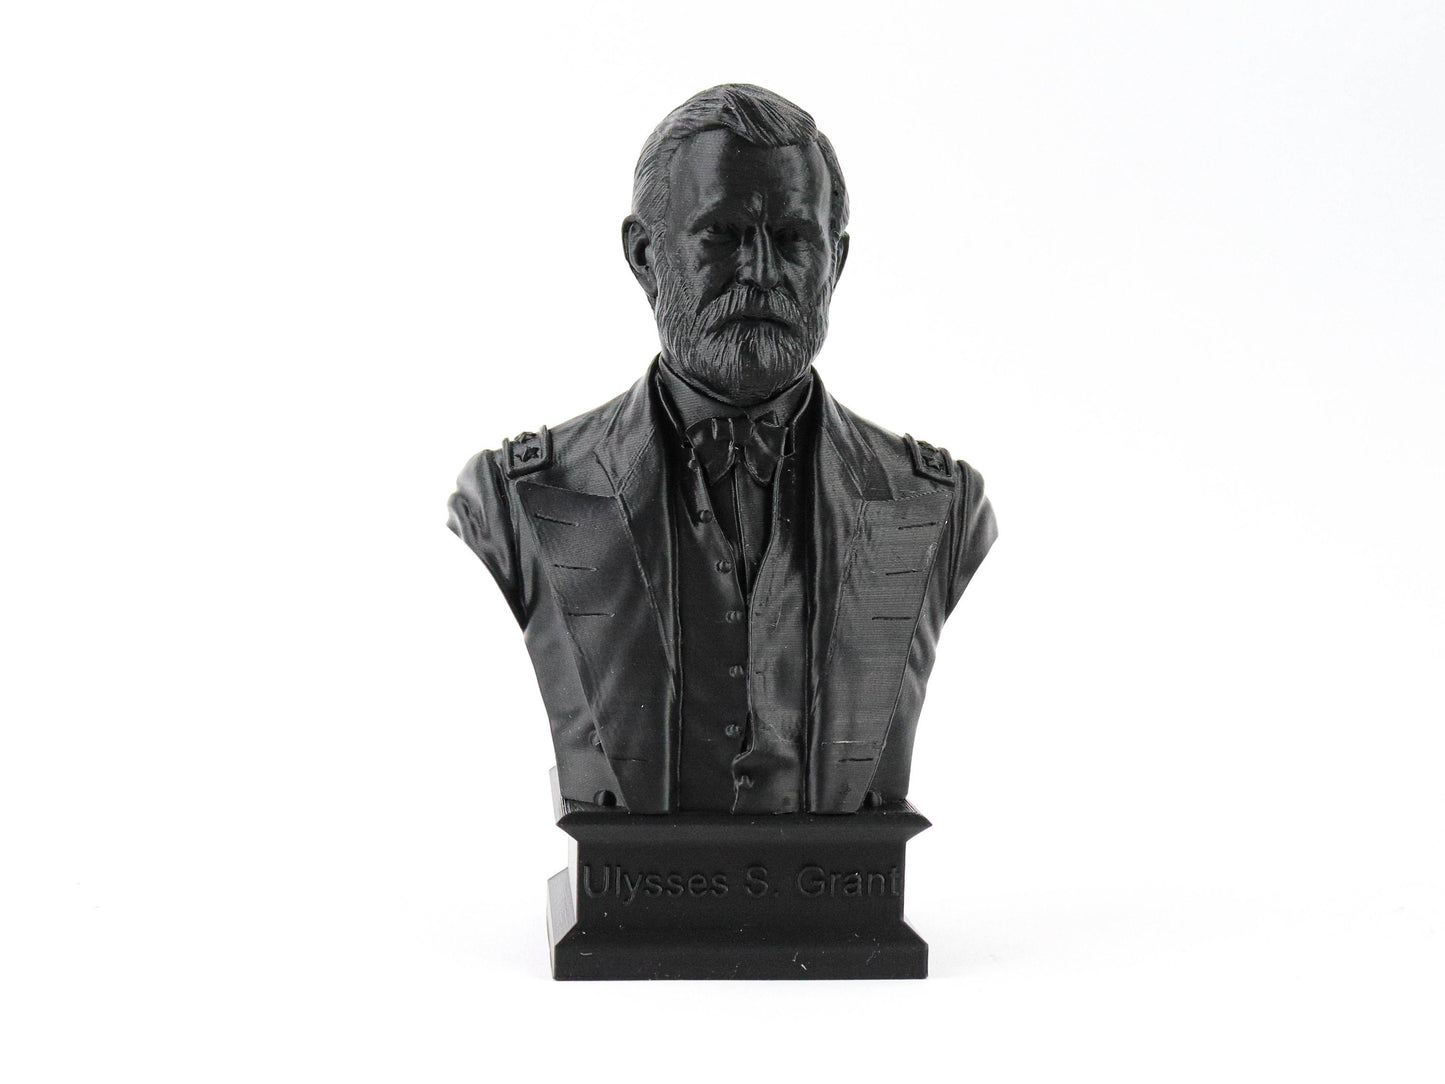 Ulyses S Grant Bust, 18th U.S. President Sculpture